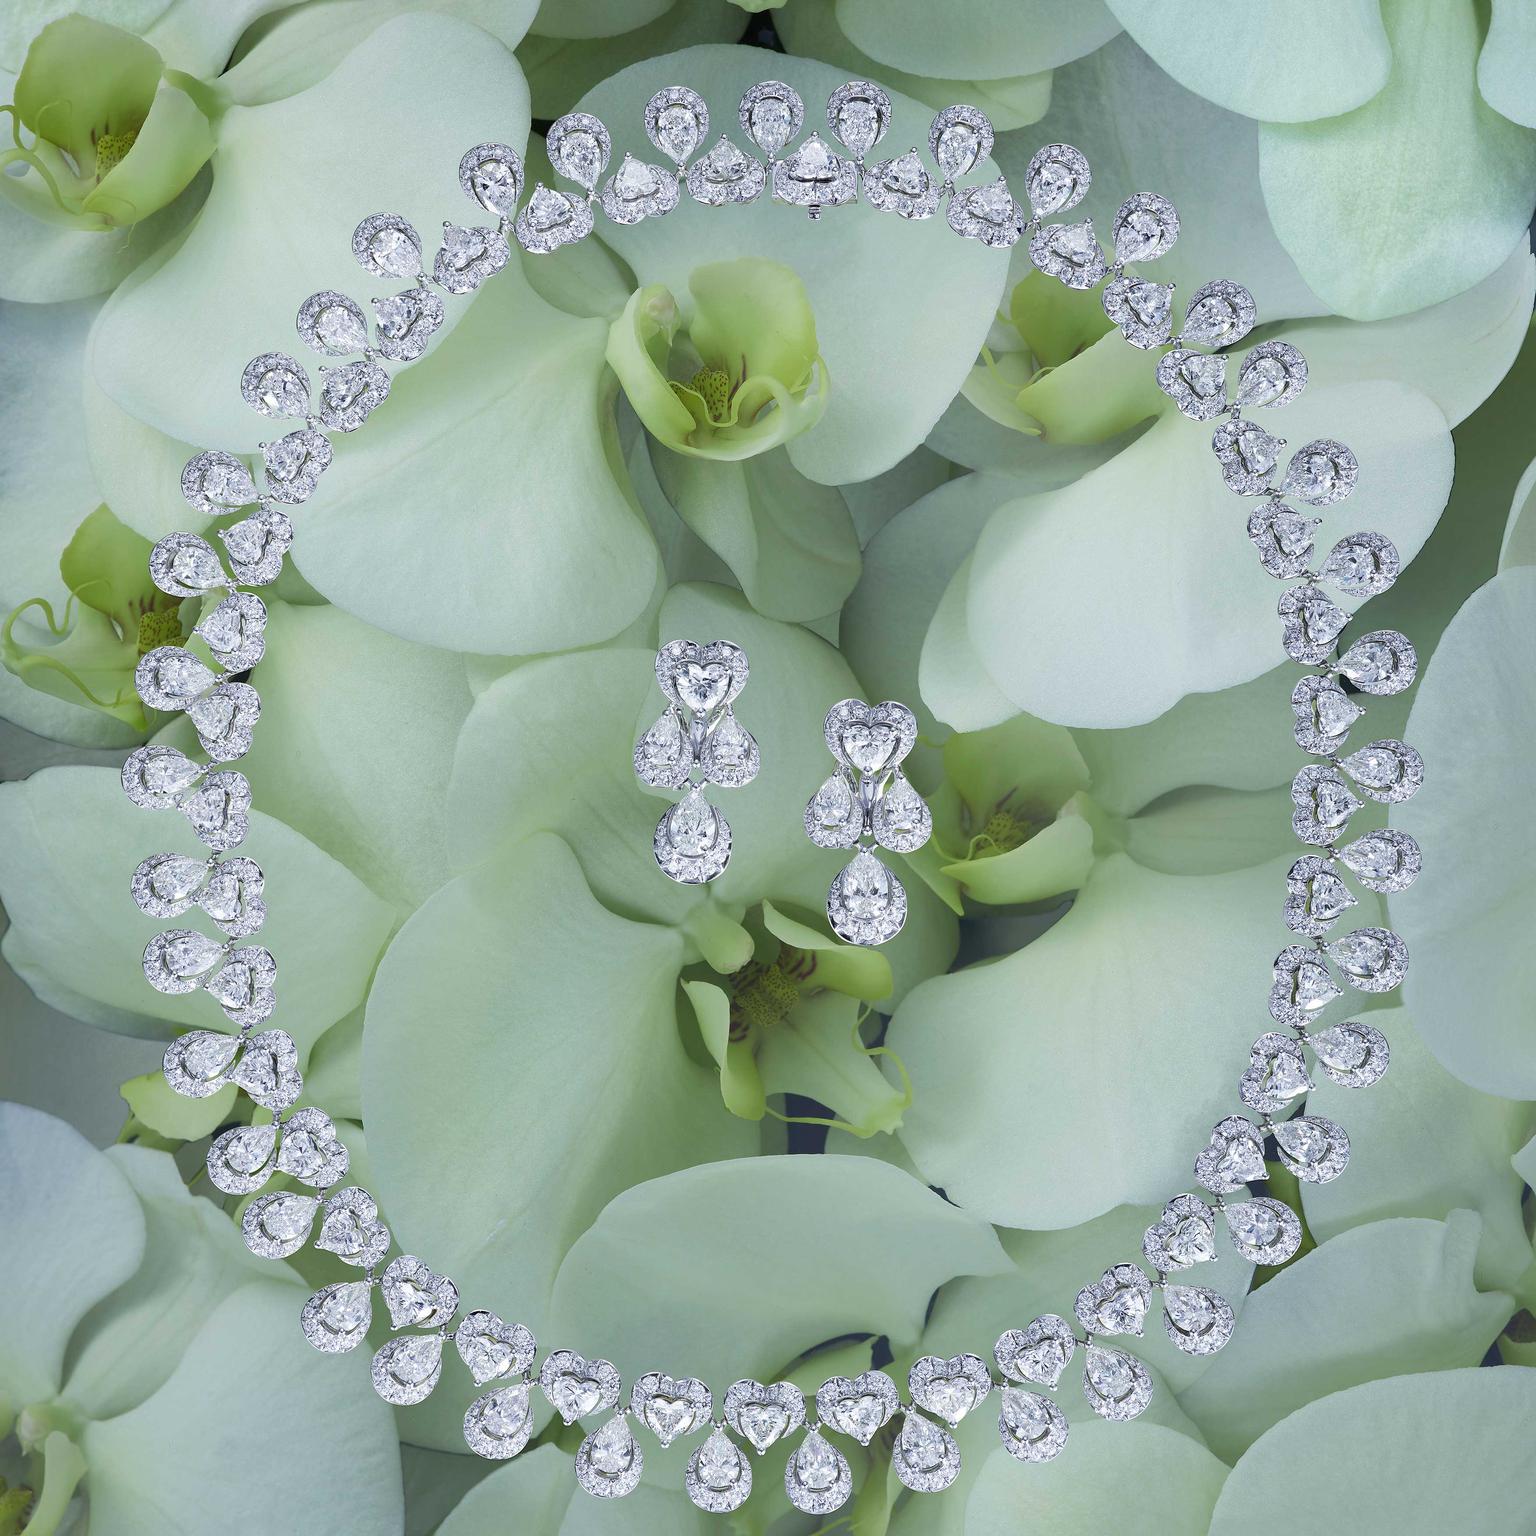 Chopard Green Carpet diamond necklace and earrings made with Fairmined gold and ethically sourced diamonds